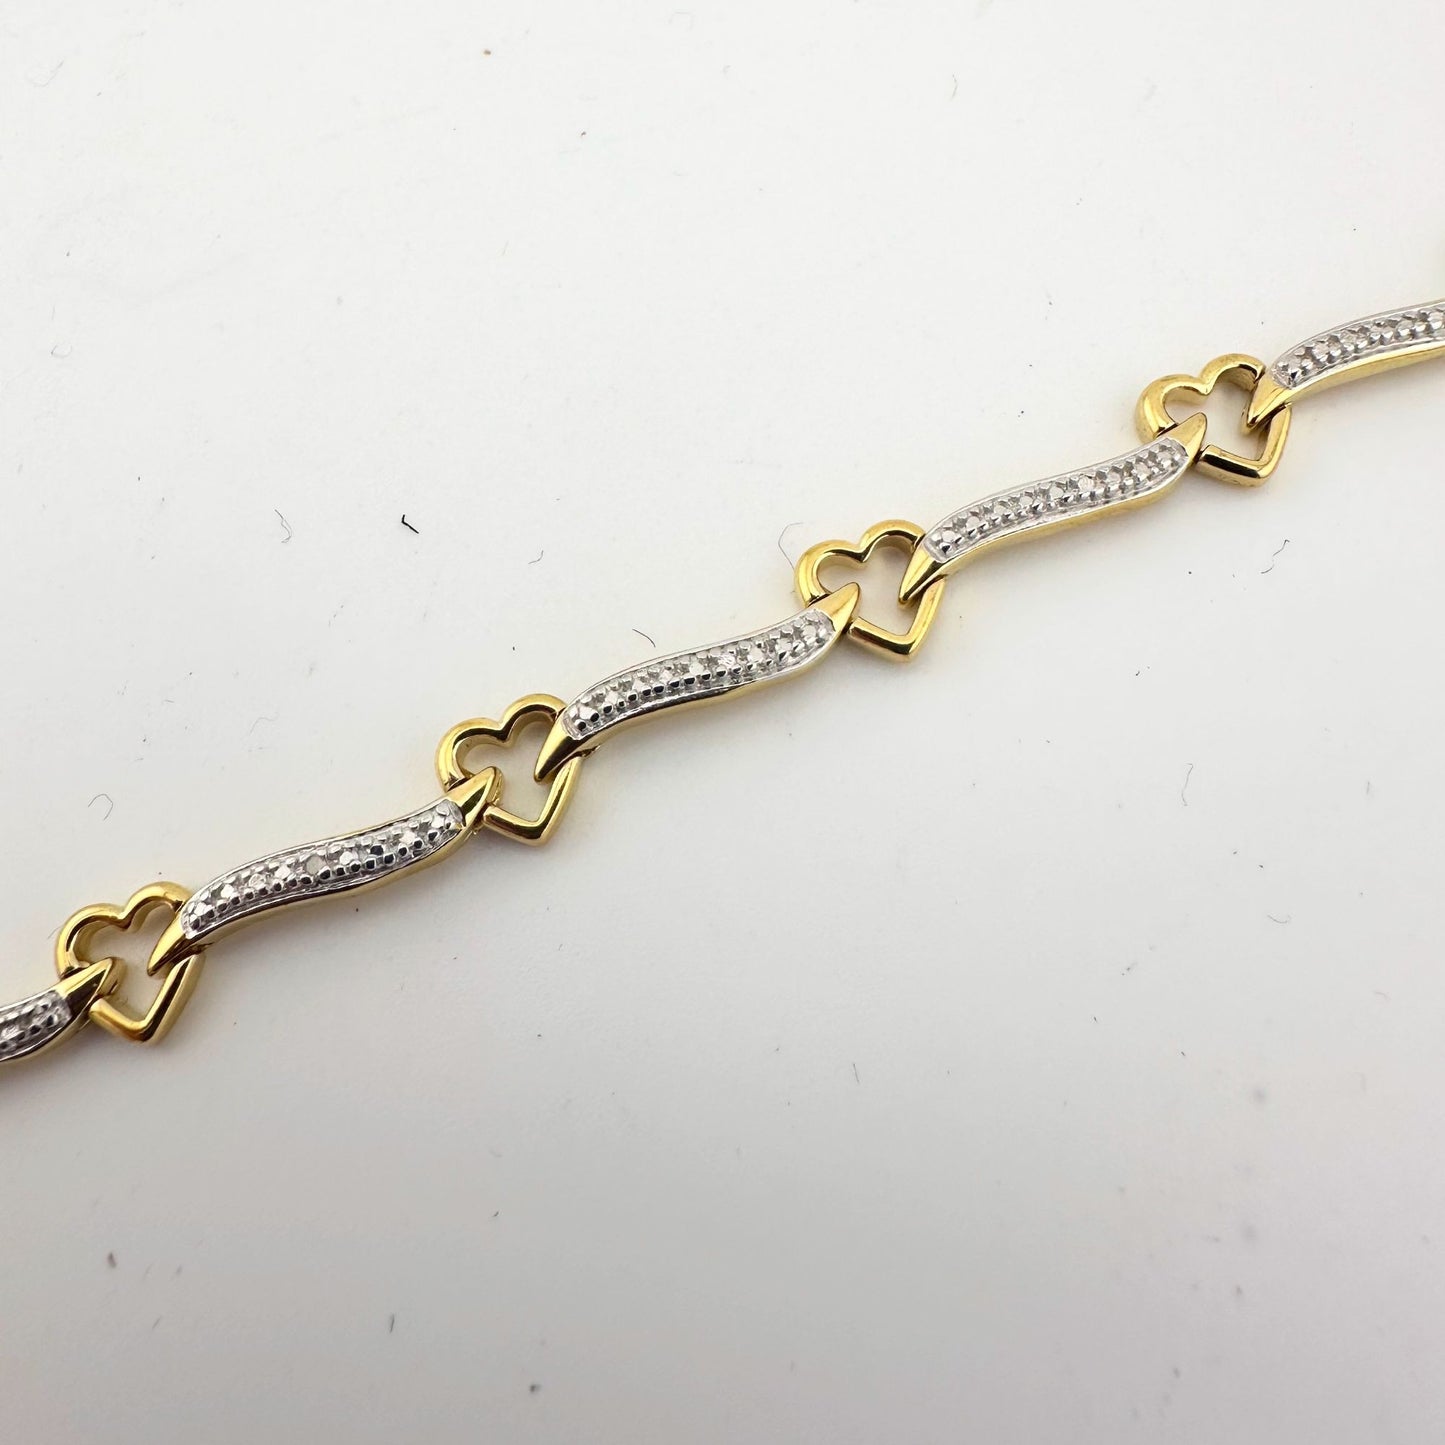 Beautiful Heart and Diamond Ribbon Bracelet - 14kt Gold overlay Sterling Silver - Spread Some Love!